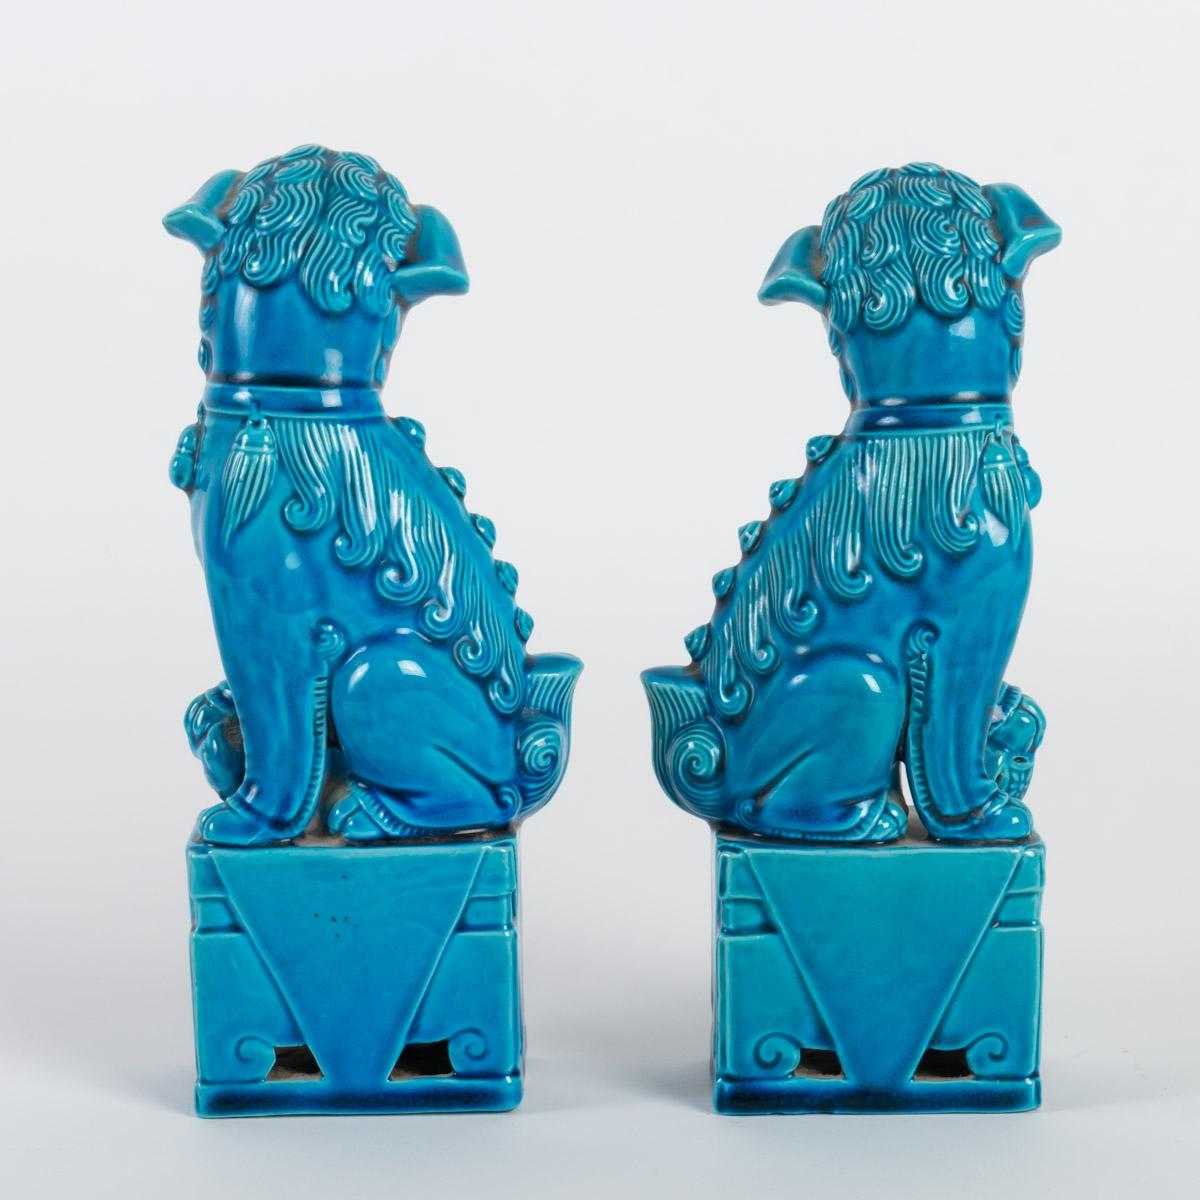 Pair of Fô Dogs in Blue Porcelain, Chinese Work from the End of the 19th Century 1